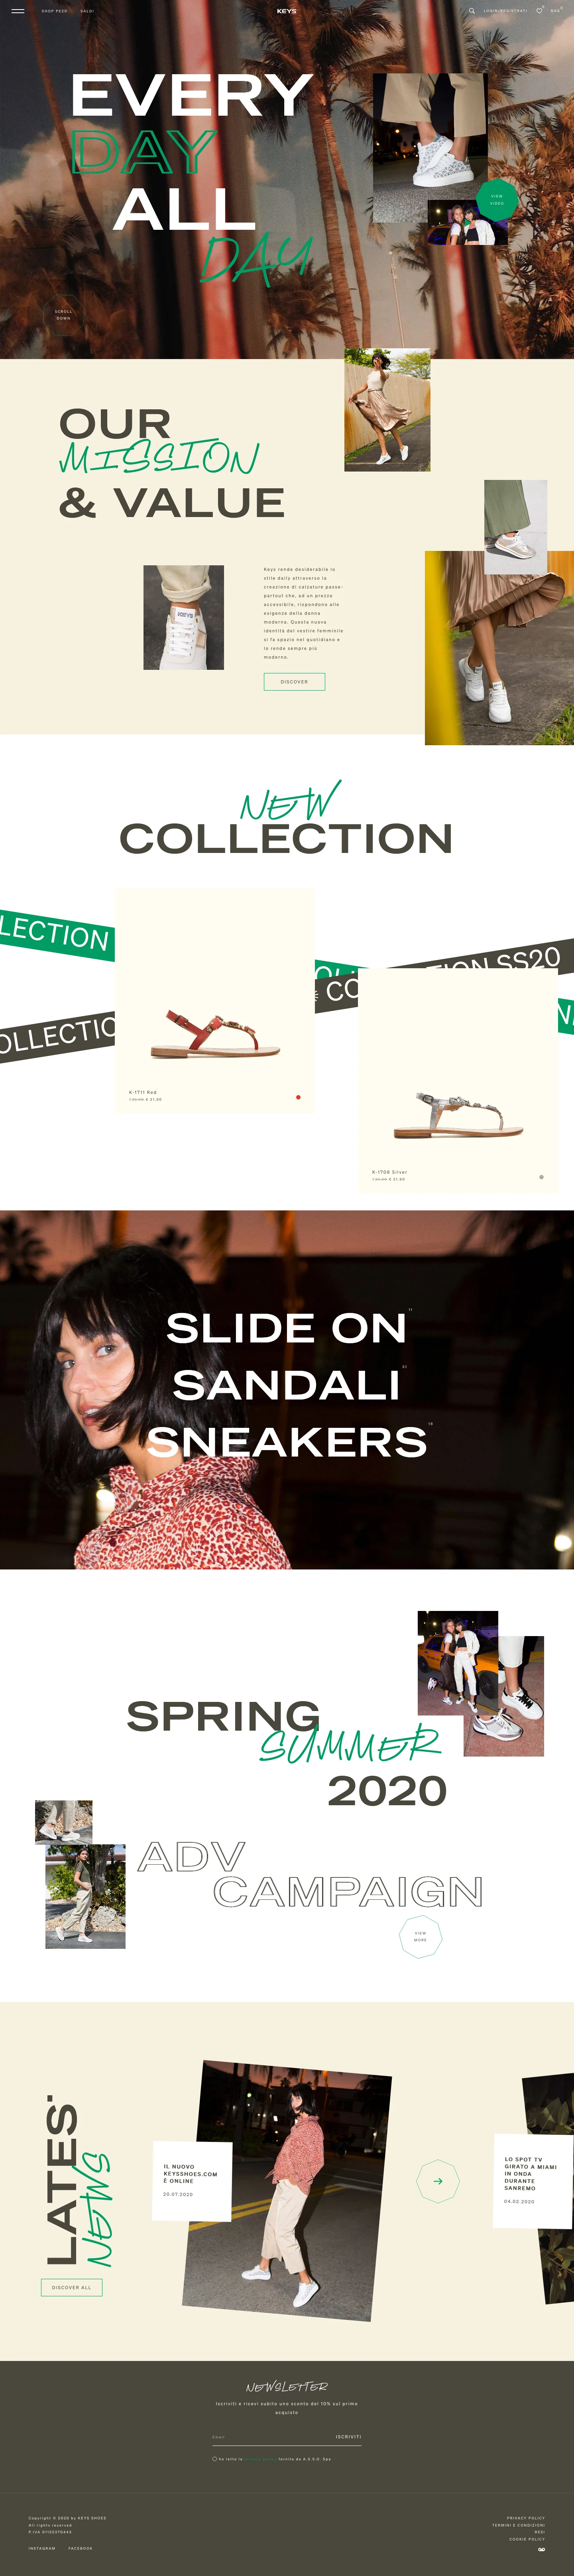 KEYS SHOES Landing Page Example: Keys creates passe-partout shoes that, at an affordable price, meet the needs of the modern woman.